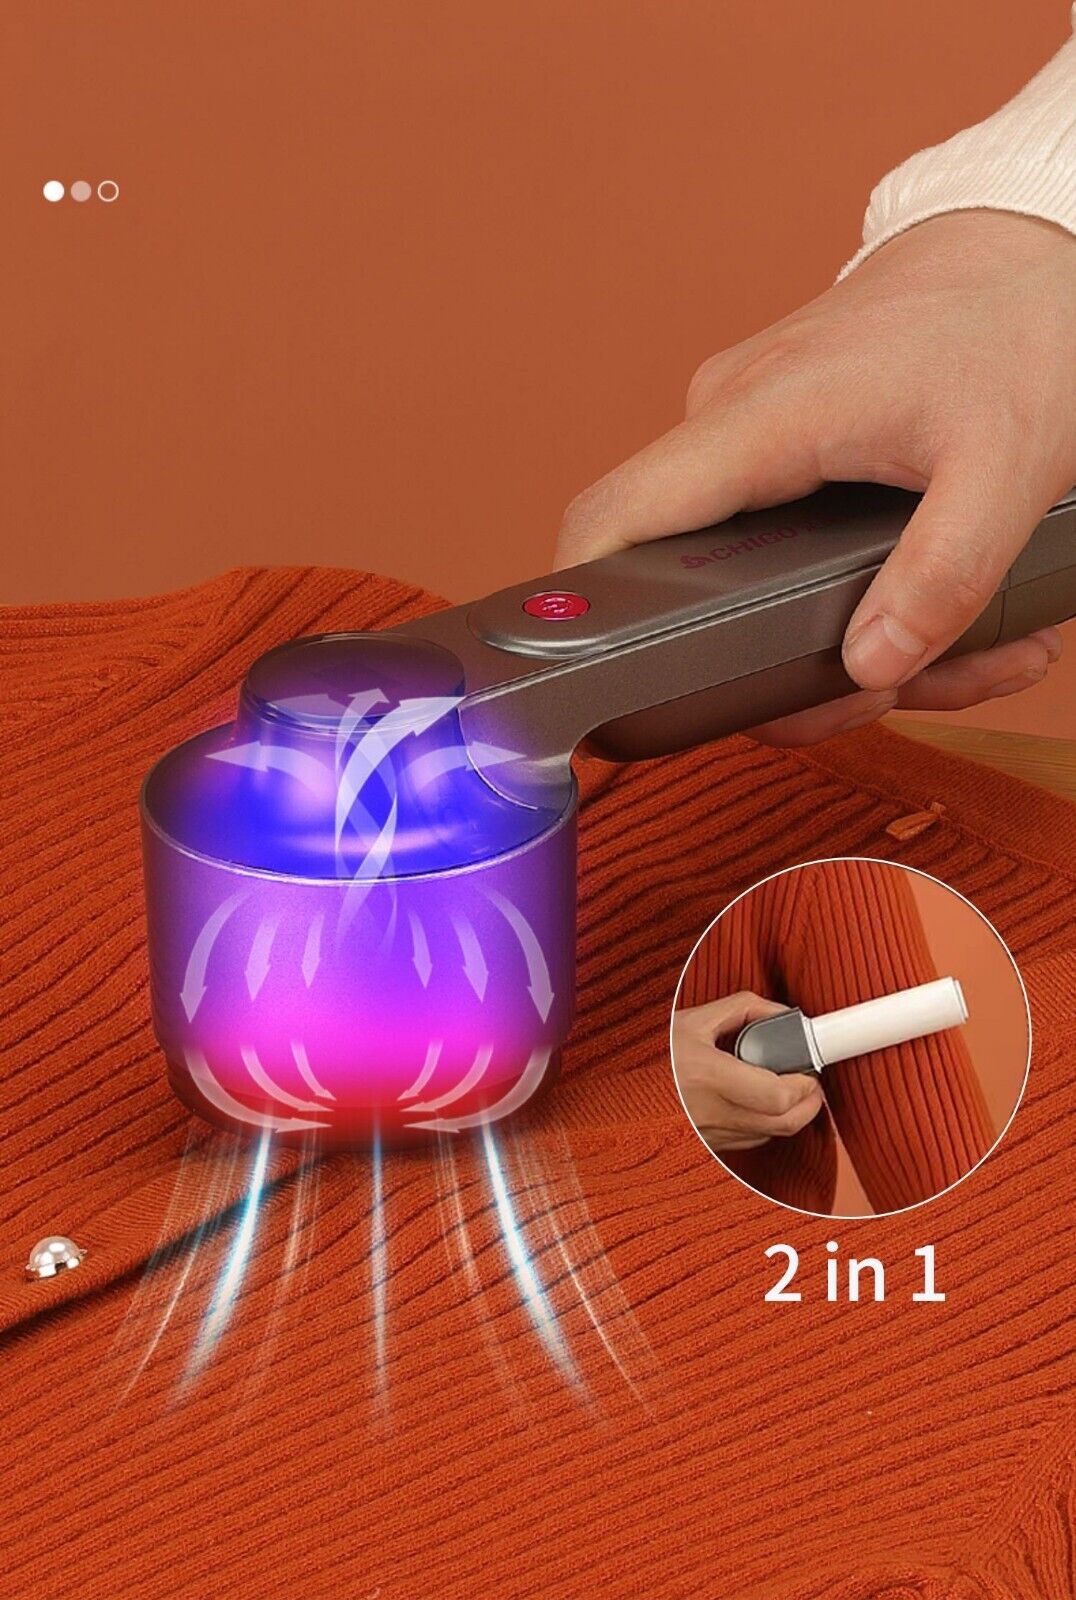 Rechargeable Lint Remover - Cart N Buy